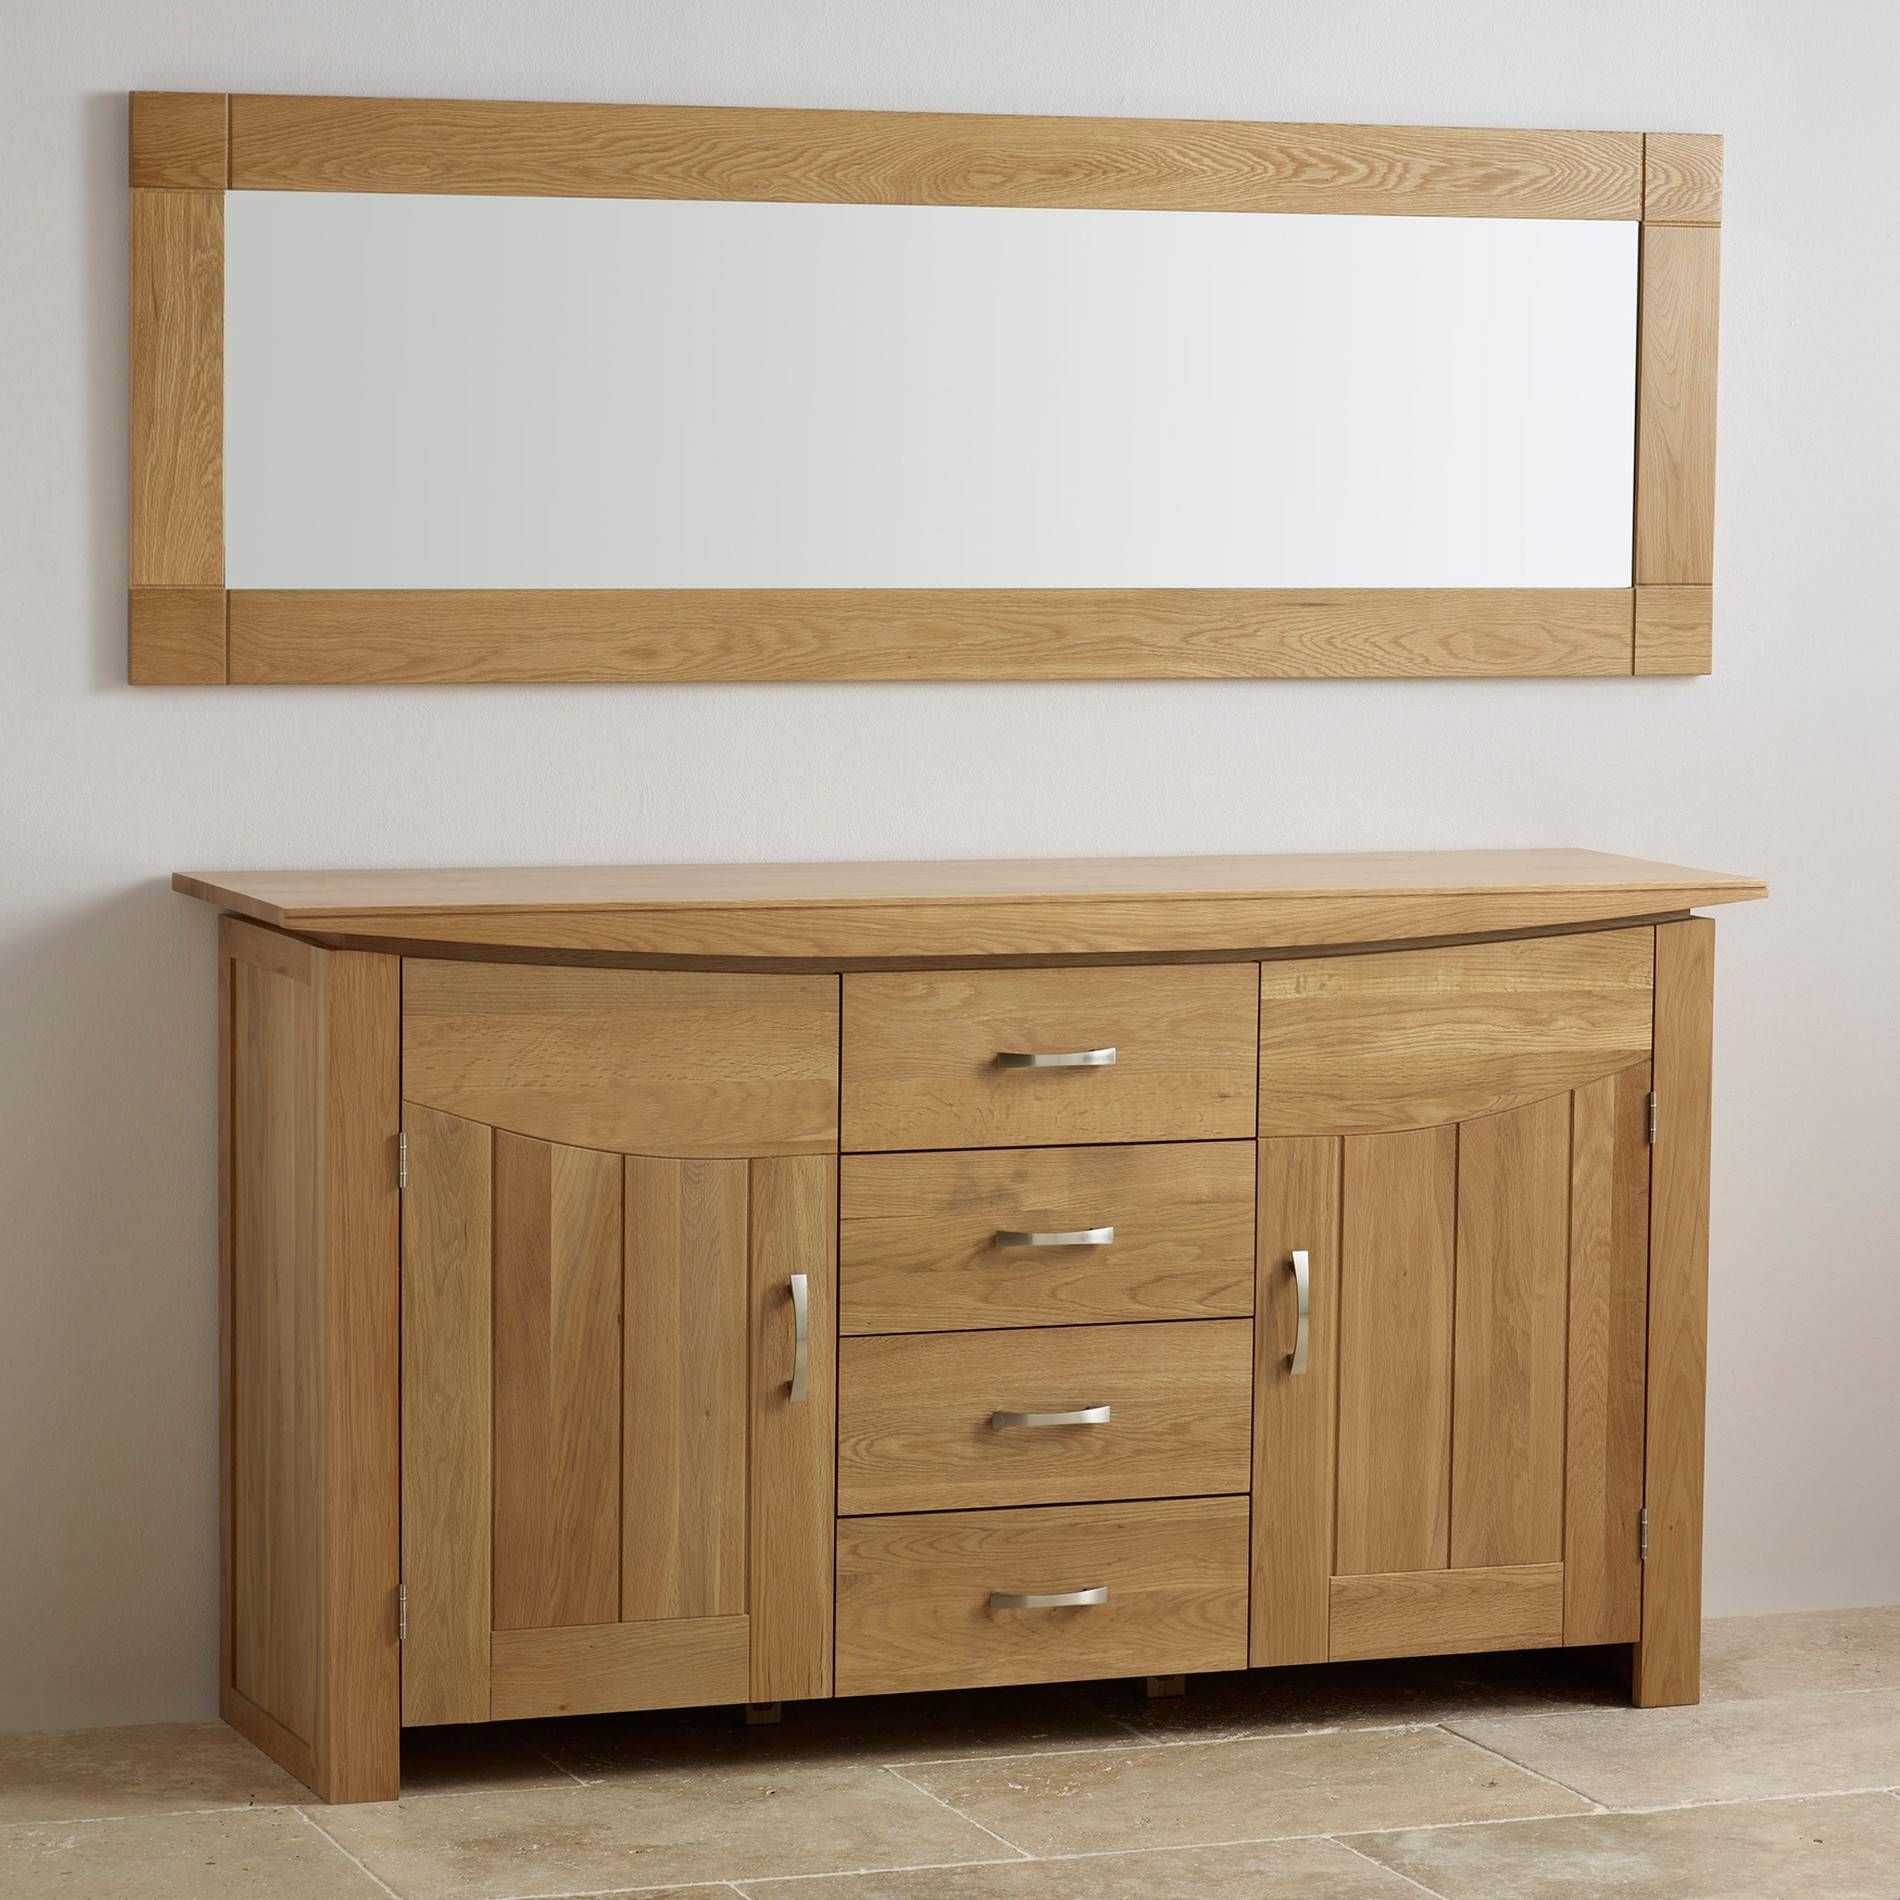 Mirrors | Bring Light To Your Room | Oak Furniture Land Within Oak Framed Wall Mirrors (View 13 of 25)